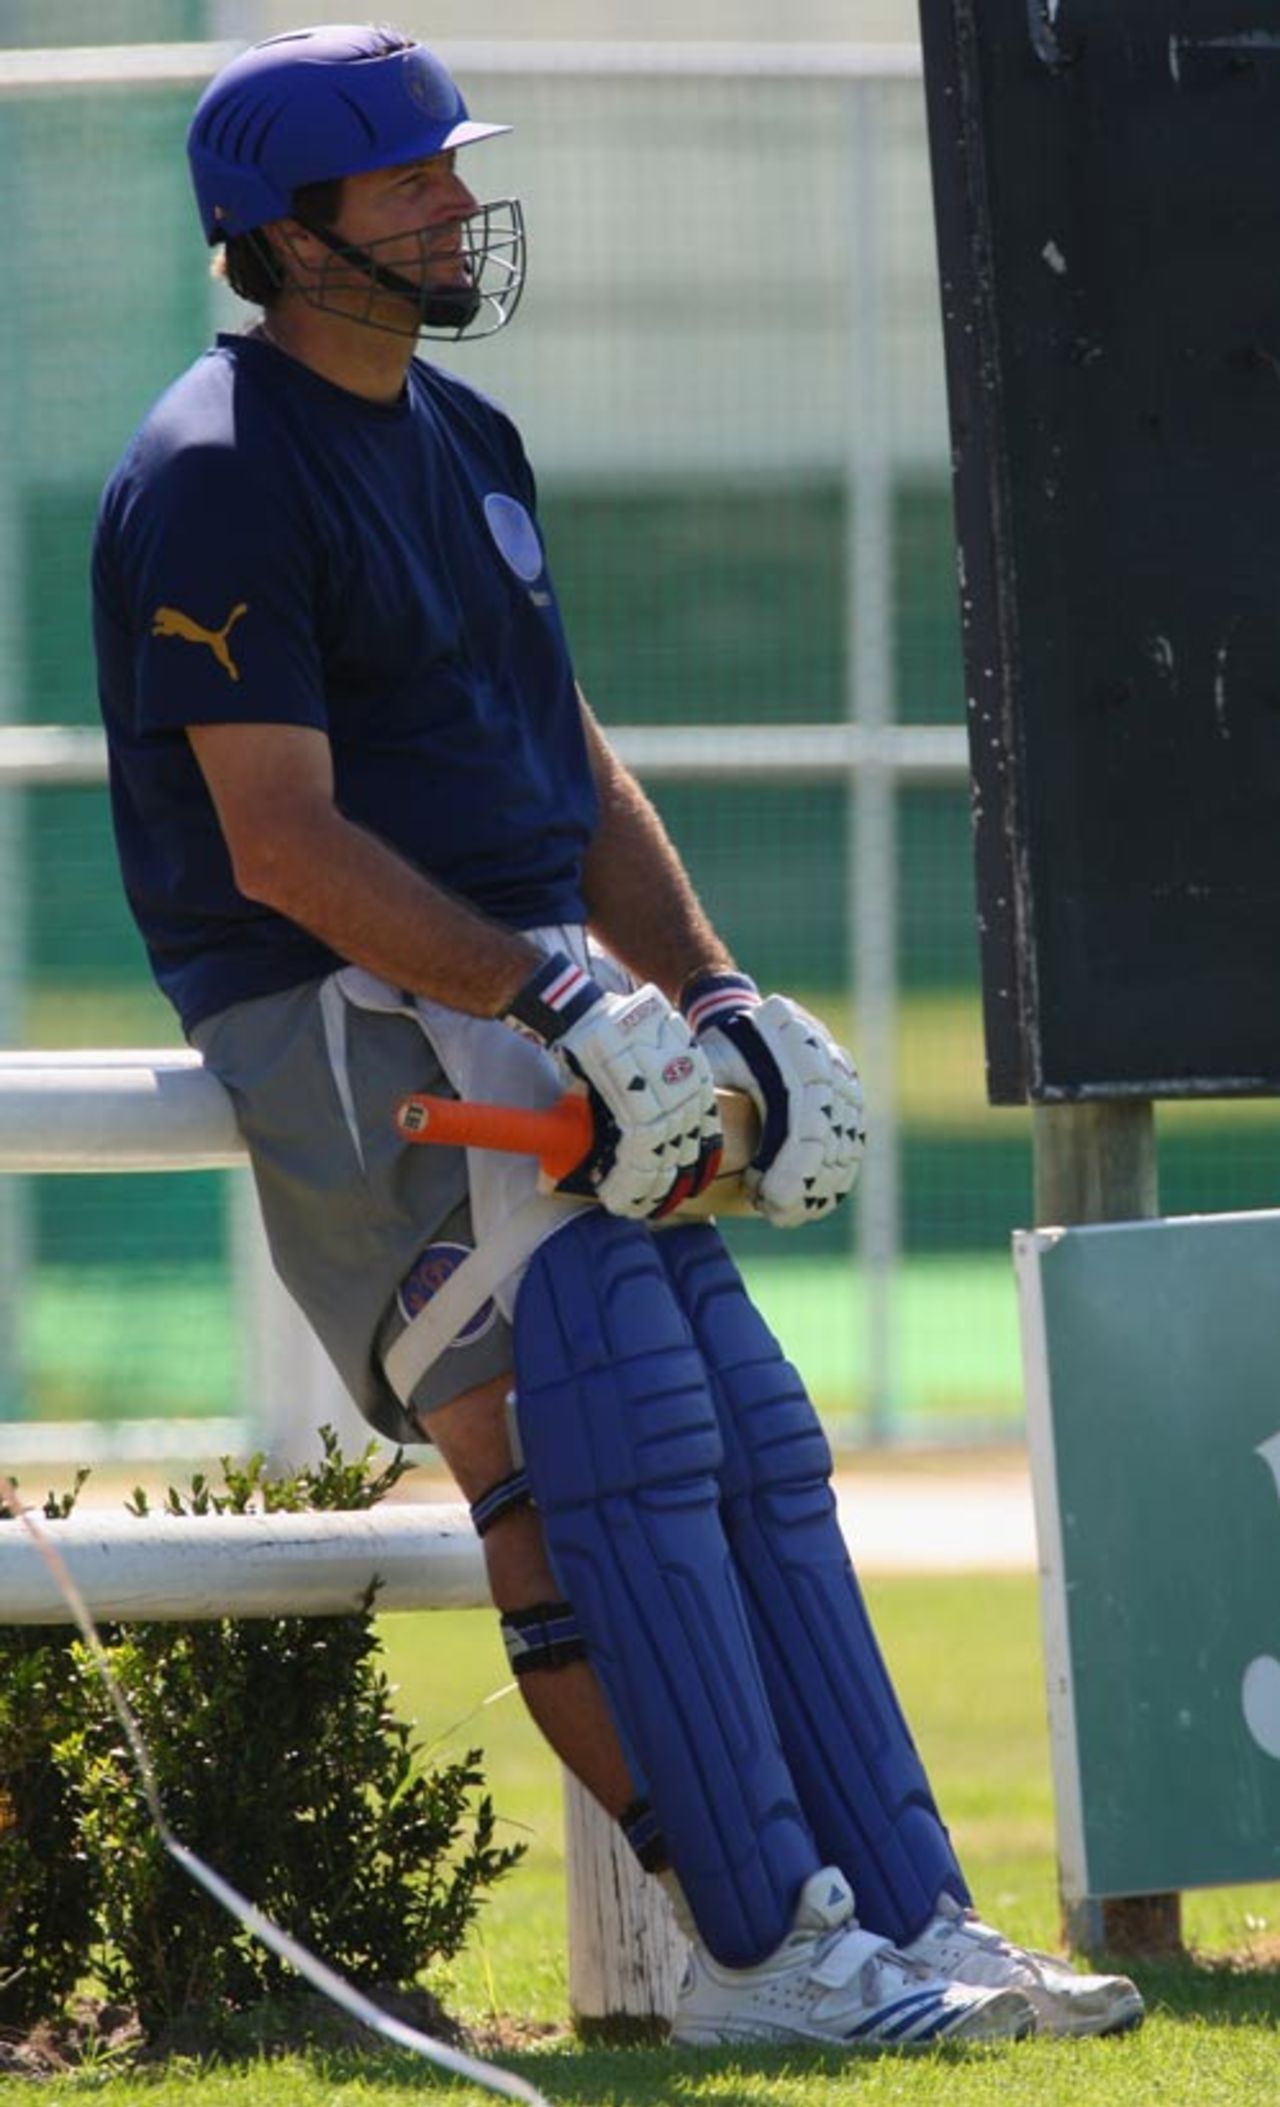 Tyron Henderson waits for his turn to bat at a Rajasthan Royals practice session, Cape Town, April 15, 2009